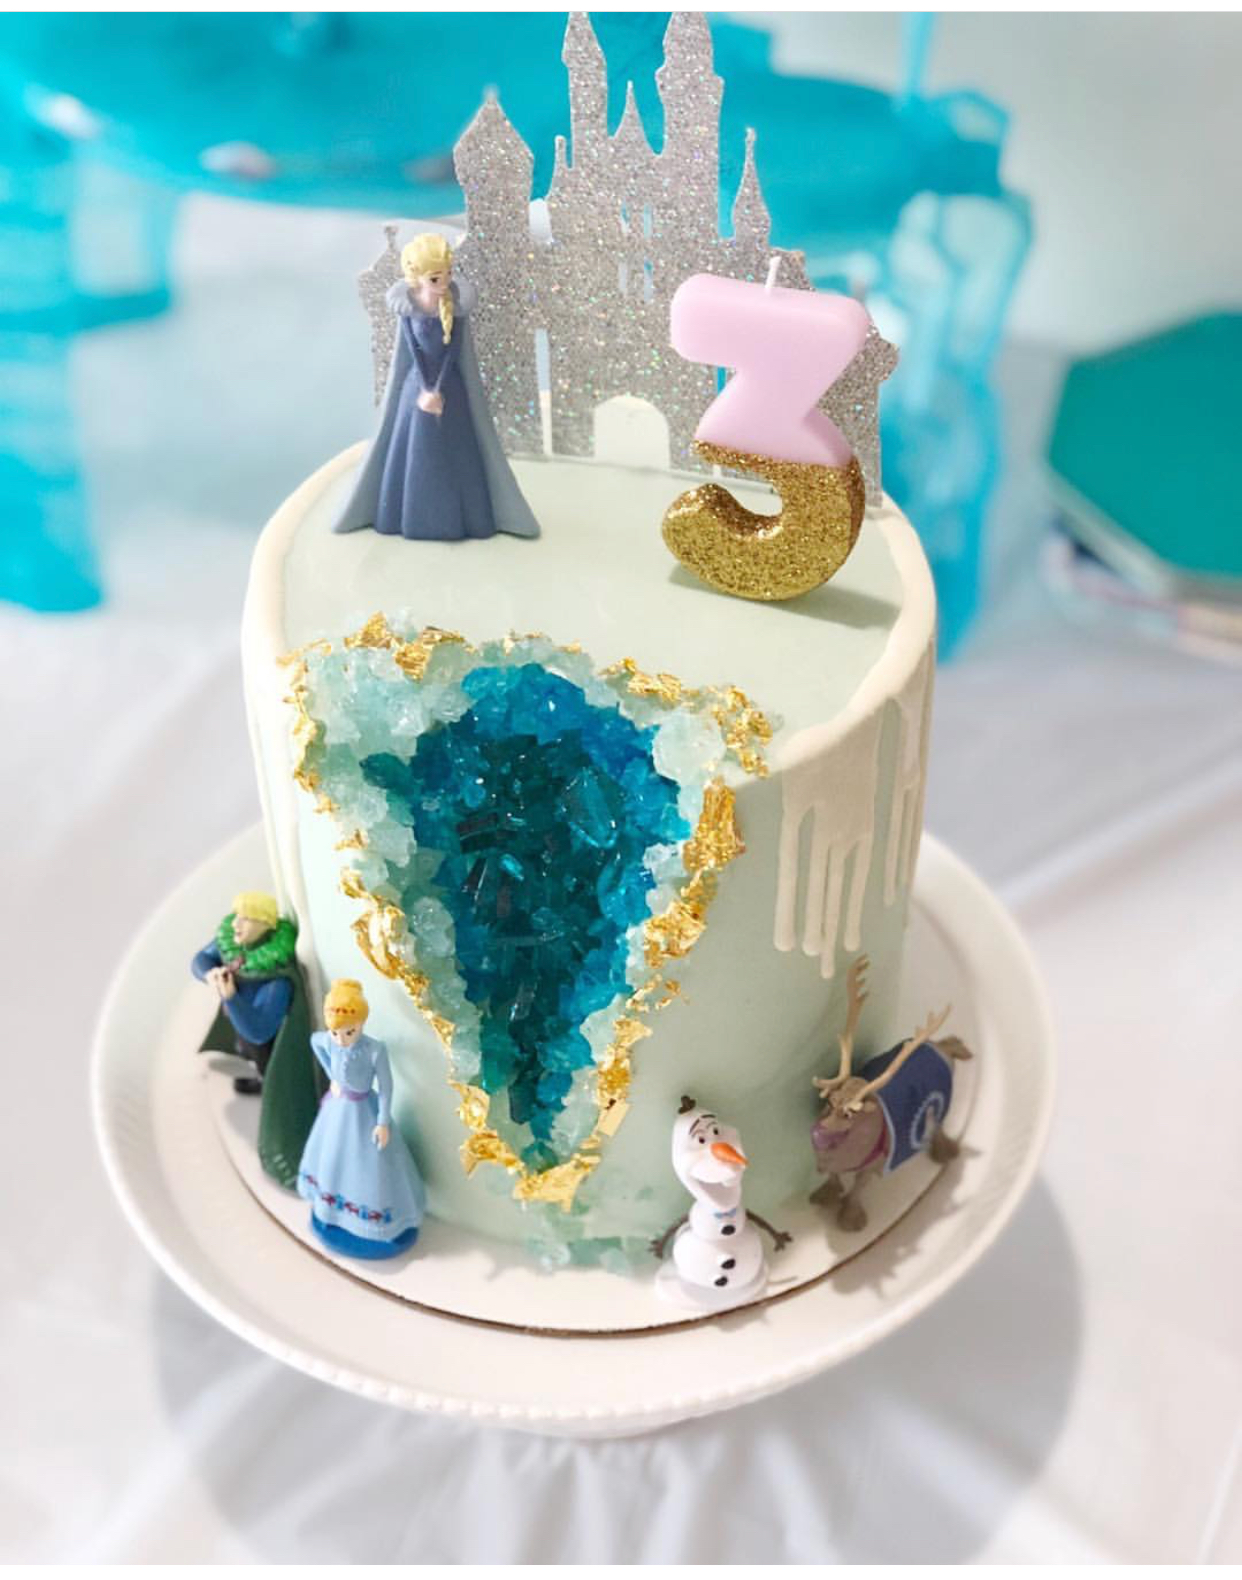 A Cake Worth Melting For